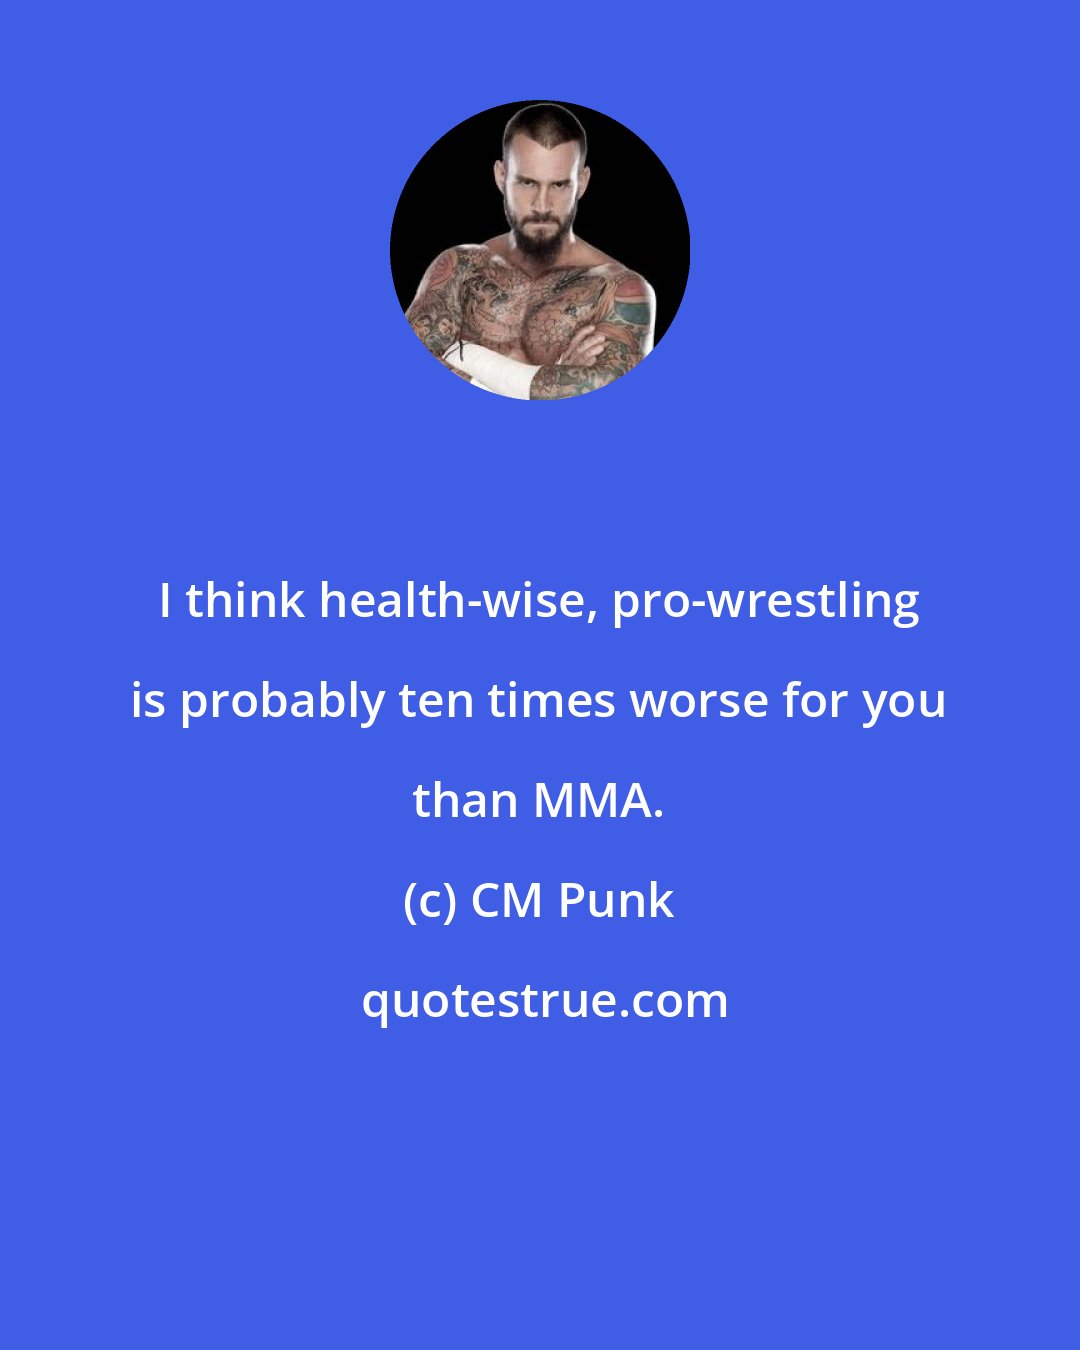 CM Punk: I think health-wise, pro-wrestling is probably ten times worse for you than MMA.